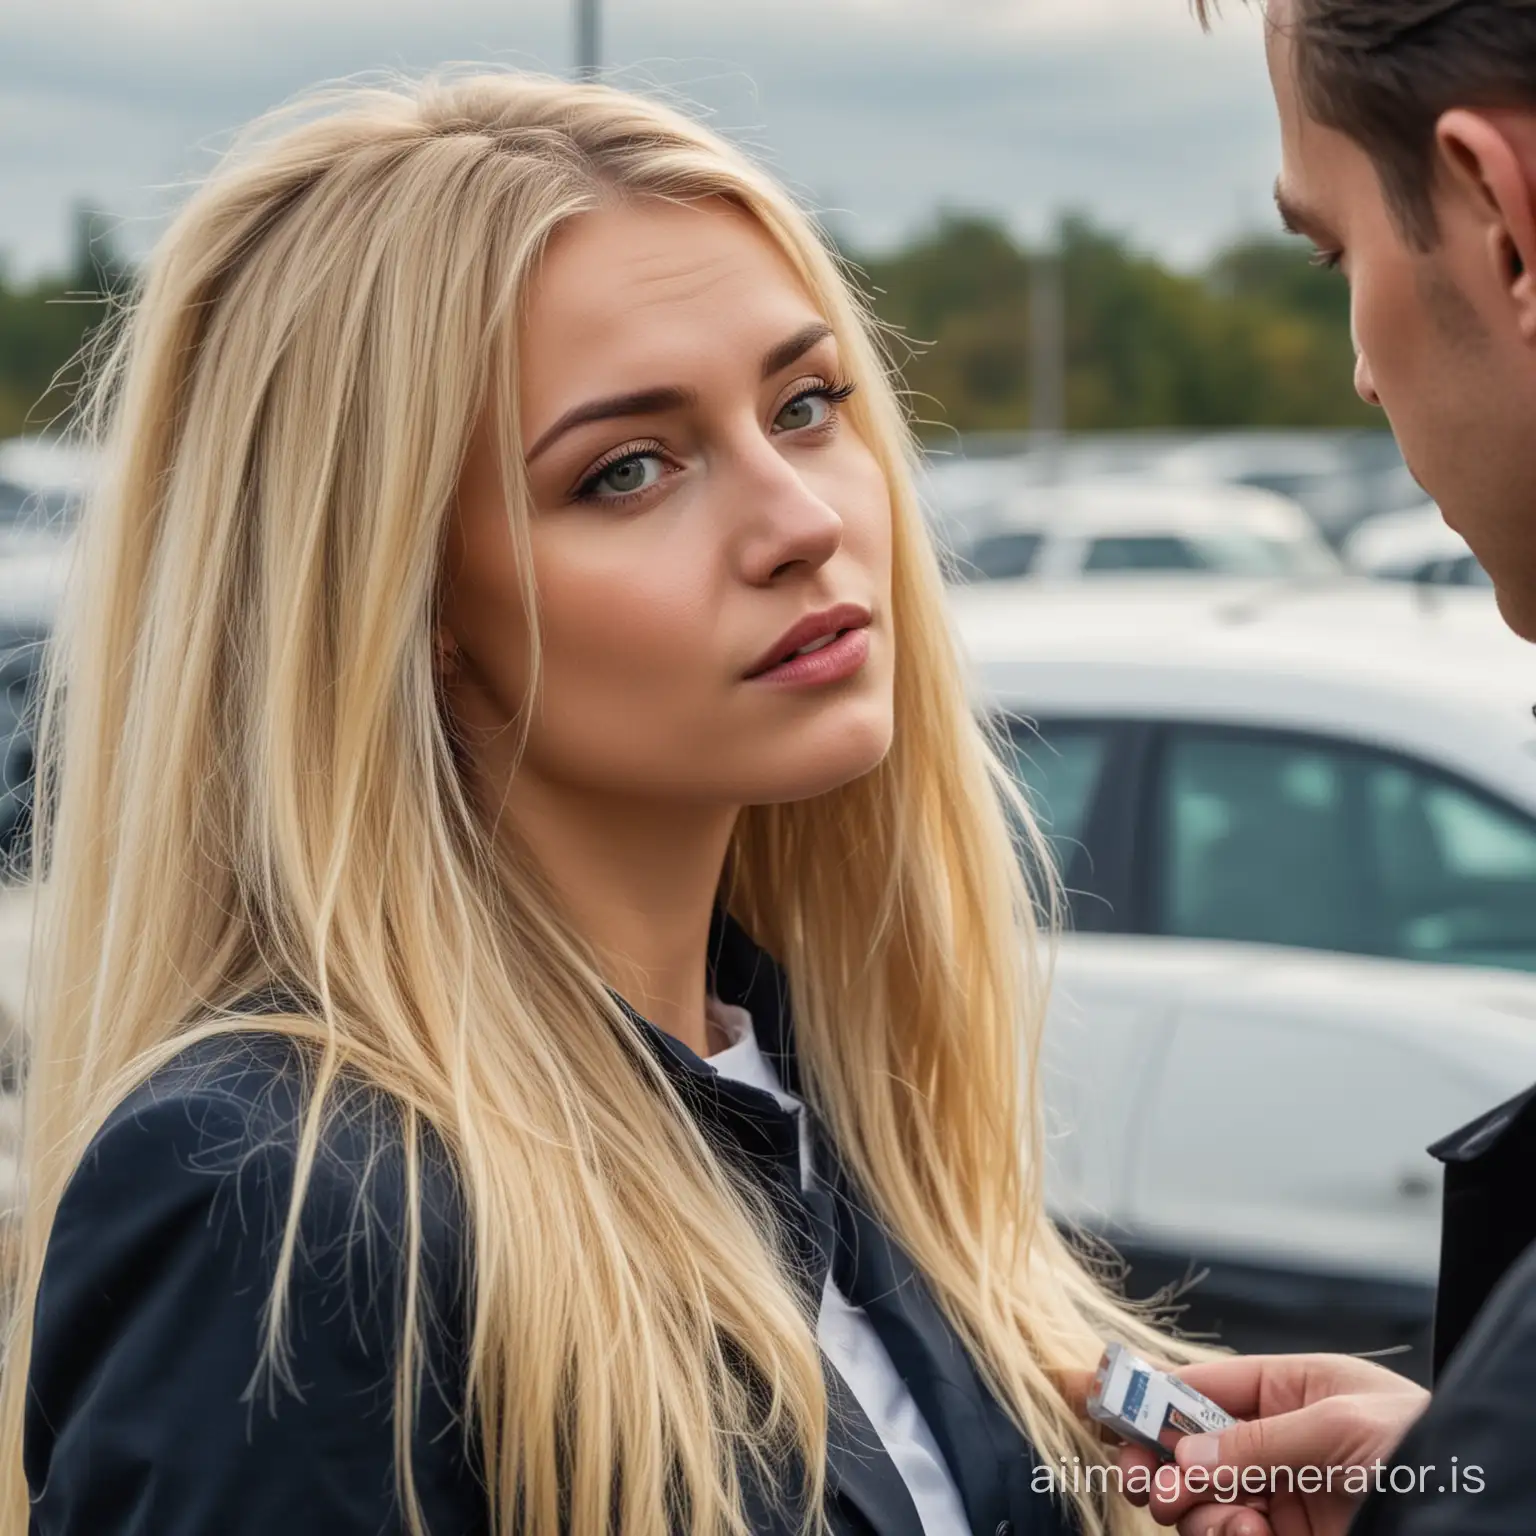 Beautiful young polish woman with long blonde hair, talking to her corrupt boss, Dan who is smuggling drugs in his imports, in a car sales yard